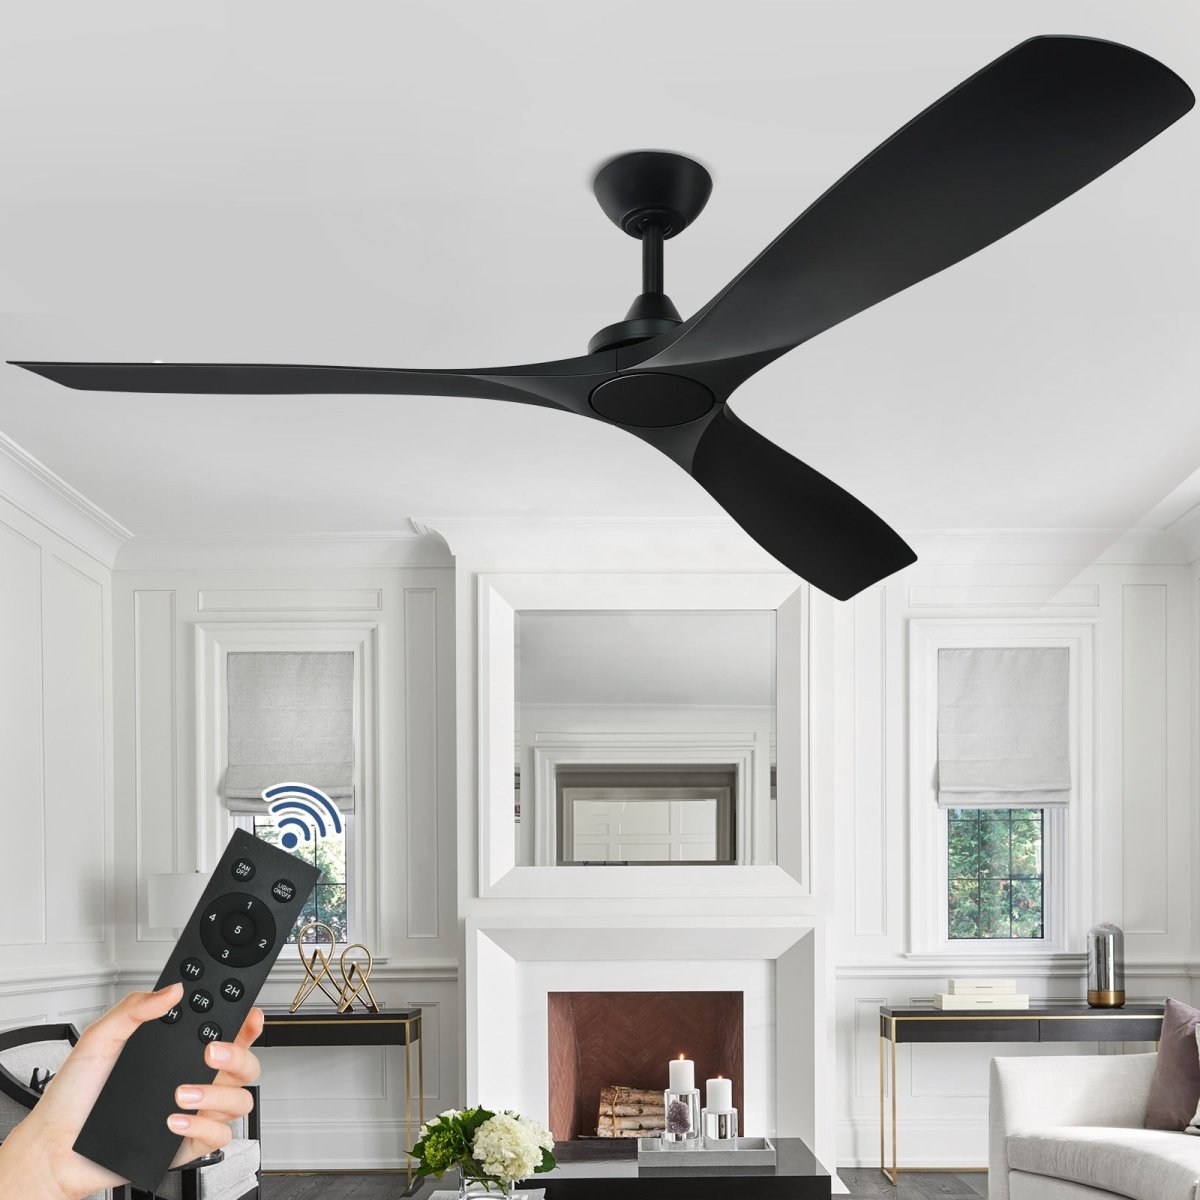 Depuley 60 Inch Large Remote Ceiling Fan Without Light, Low Profile Ceiling Fan No Light with 3 Blades and Noiseless Reversible DC Motor for Patio, Kitchen, Farmhouse & Covered Outdoor, Timer - Black - WS-FPZ43-18B-BL 3 | DEPULEY